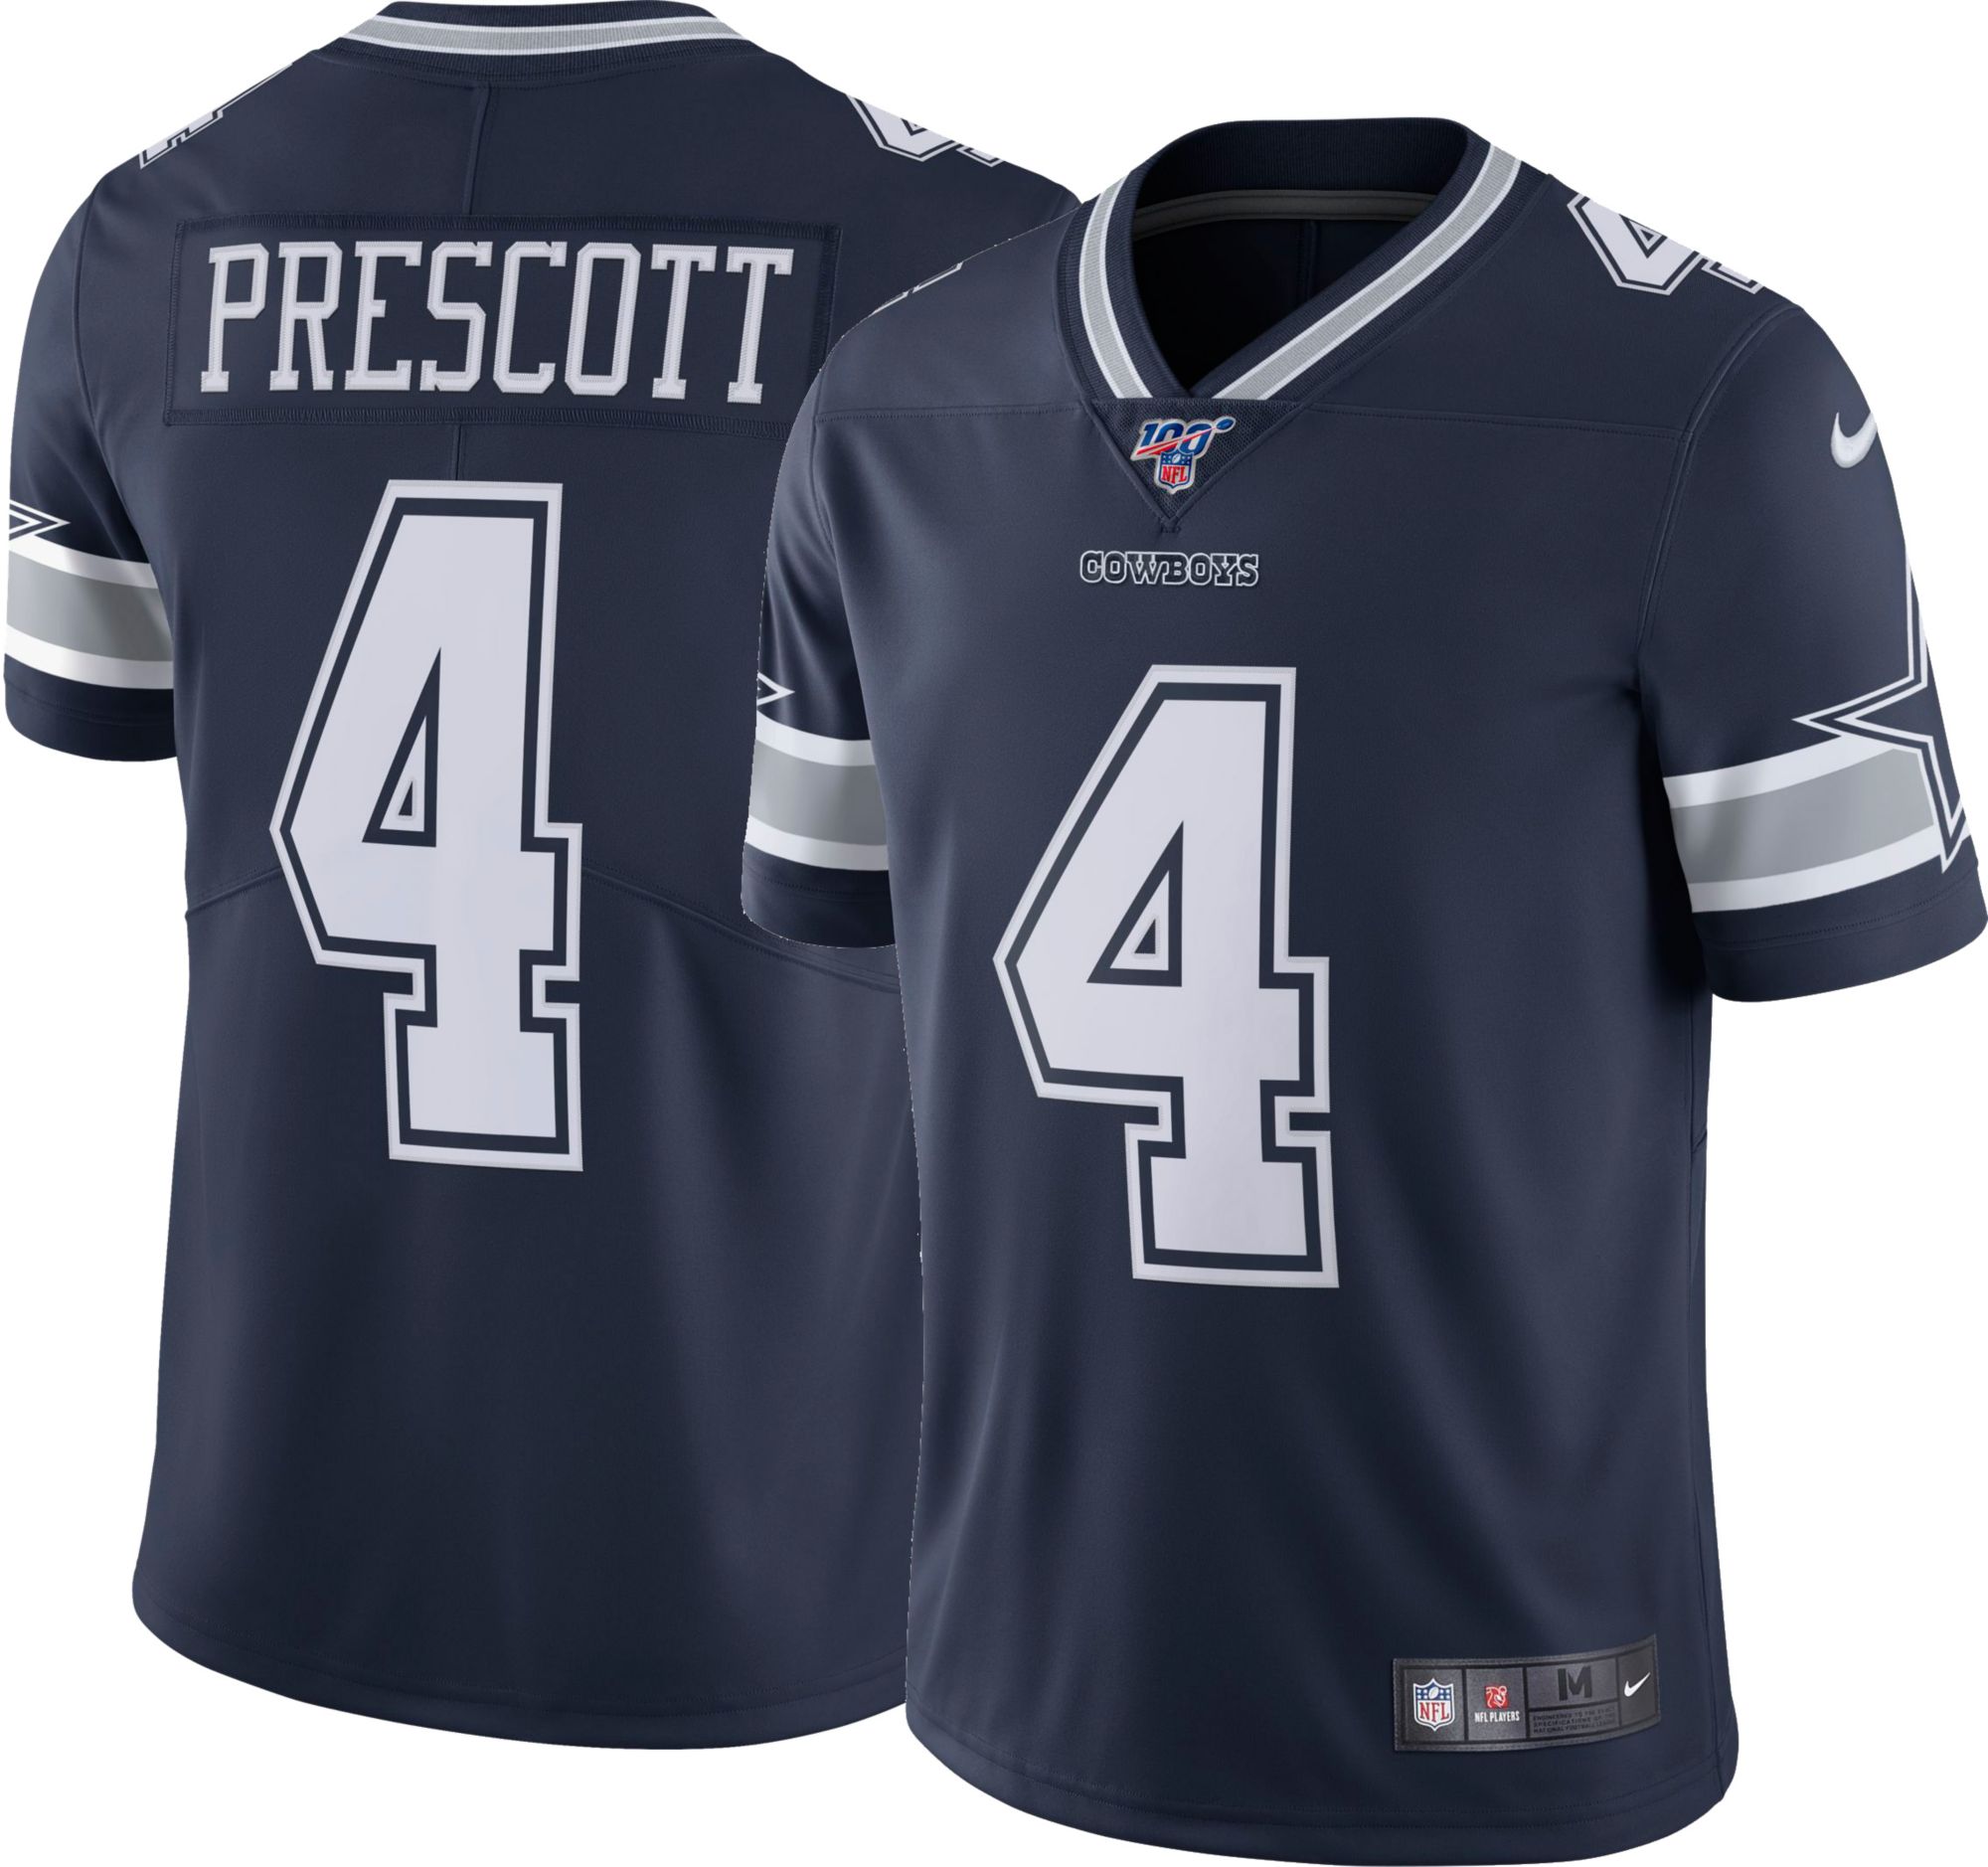 cowboys jersey with my name